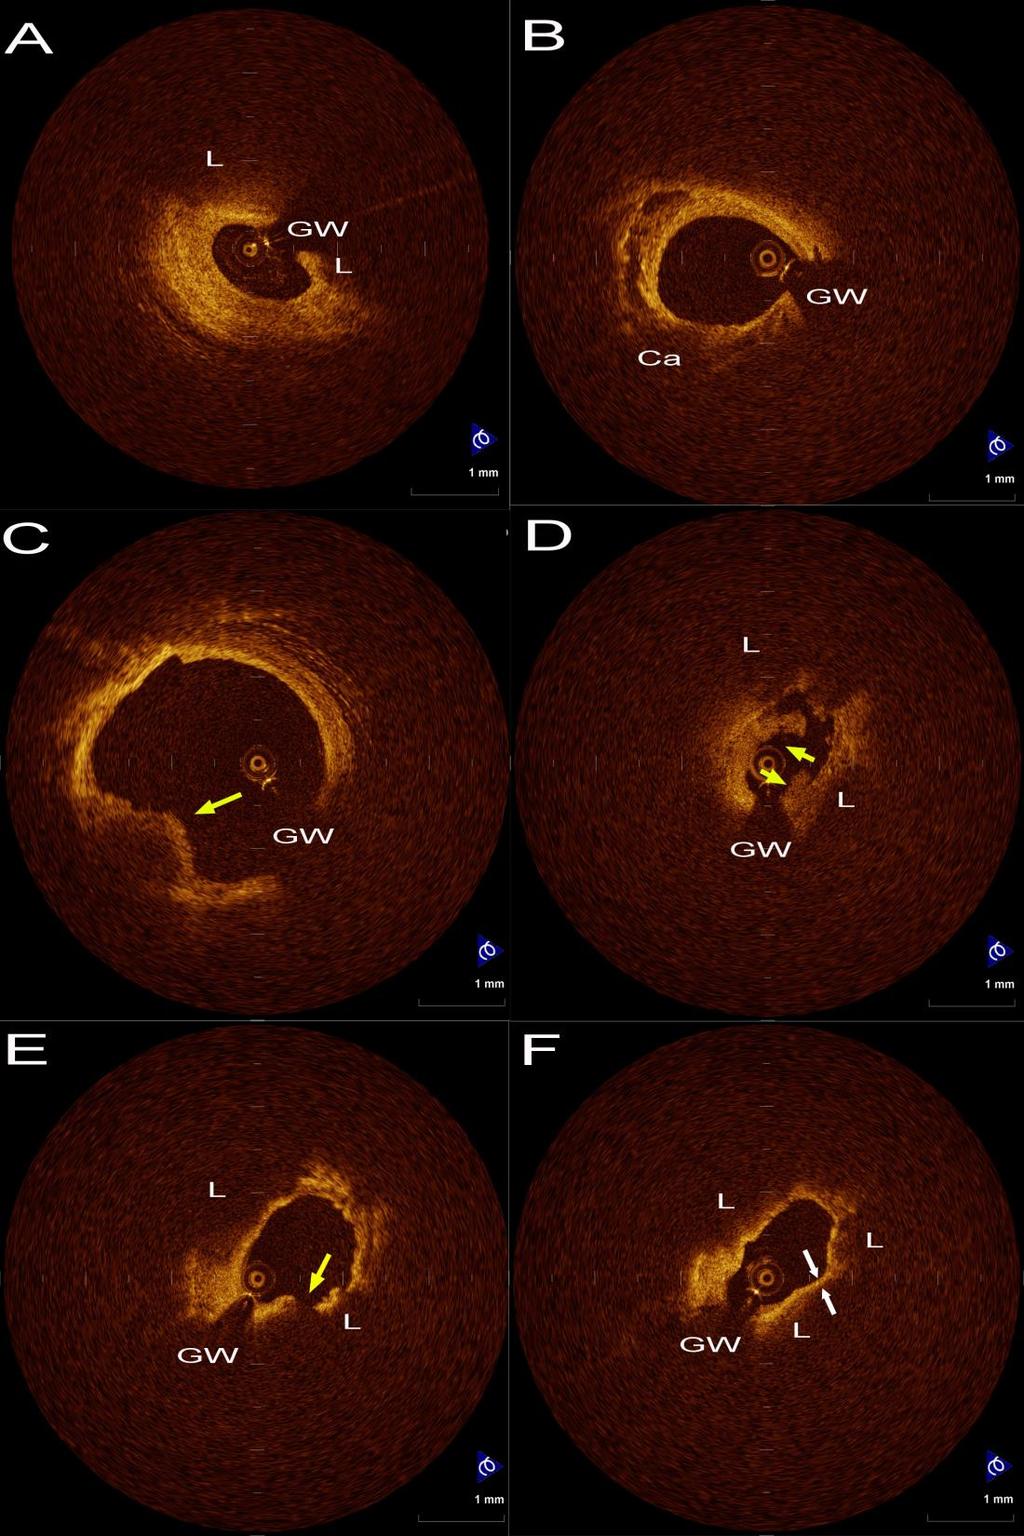 Evaluation of culprit lesion in ACS revealed multiple